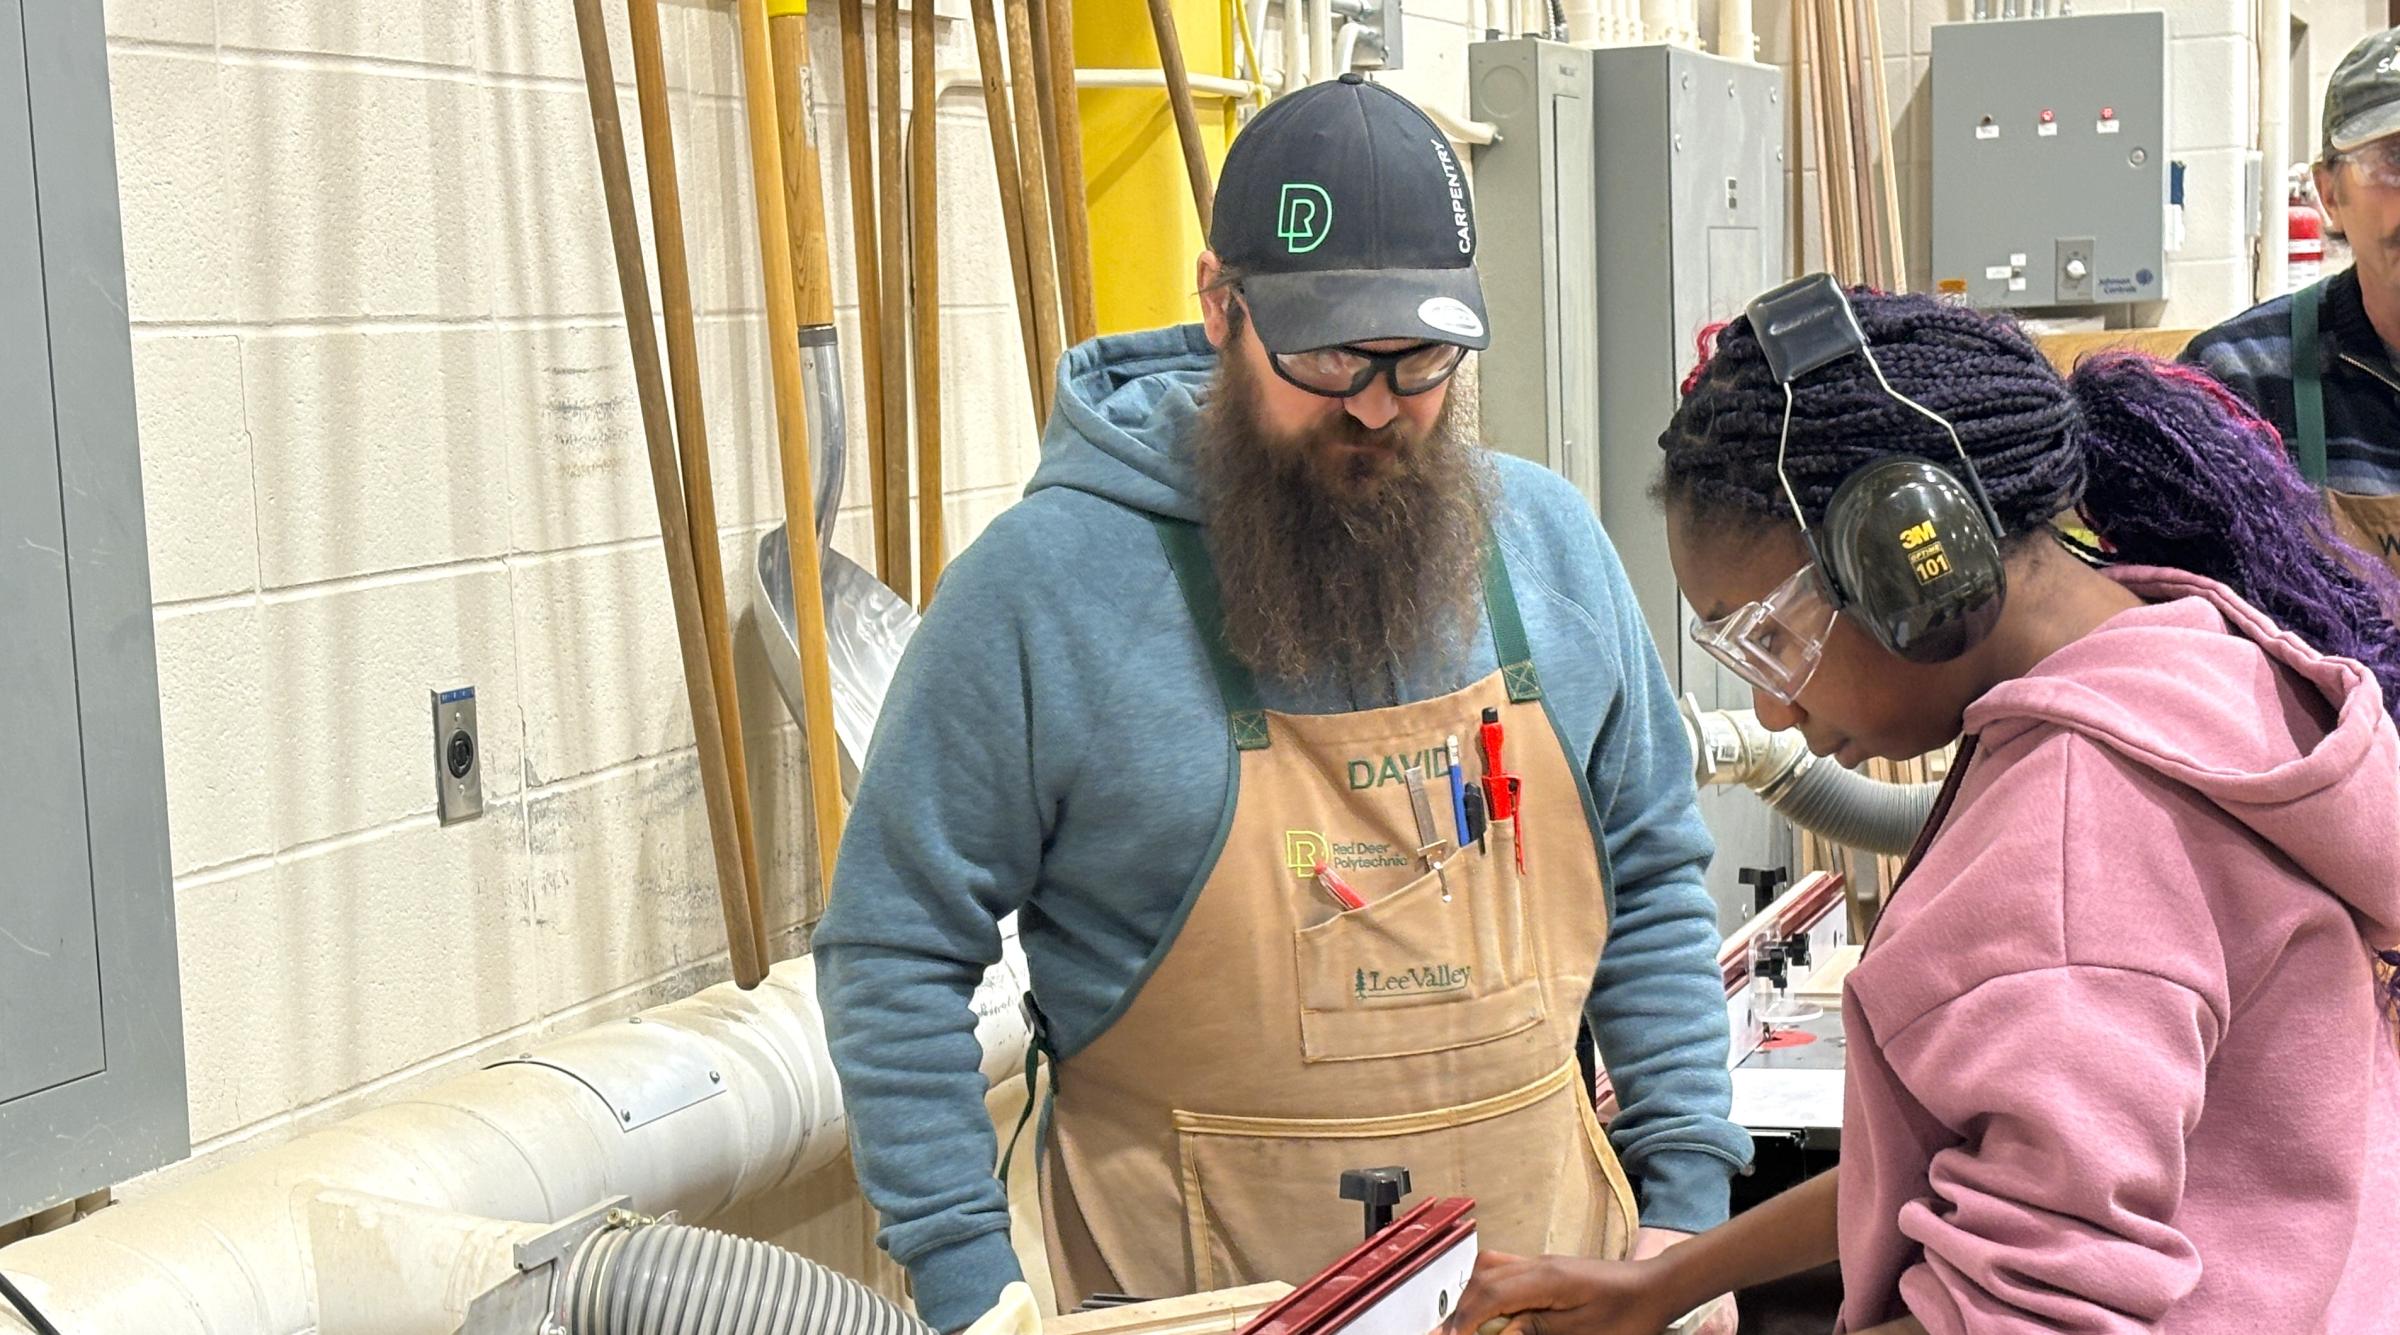 A bearded faculty member watches as a young female student cuts some wood on a large table saw.